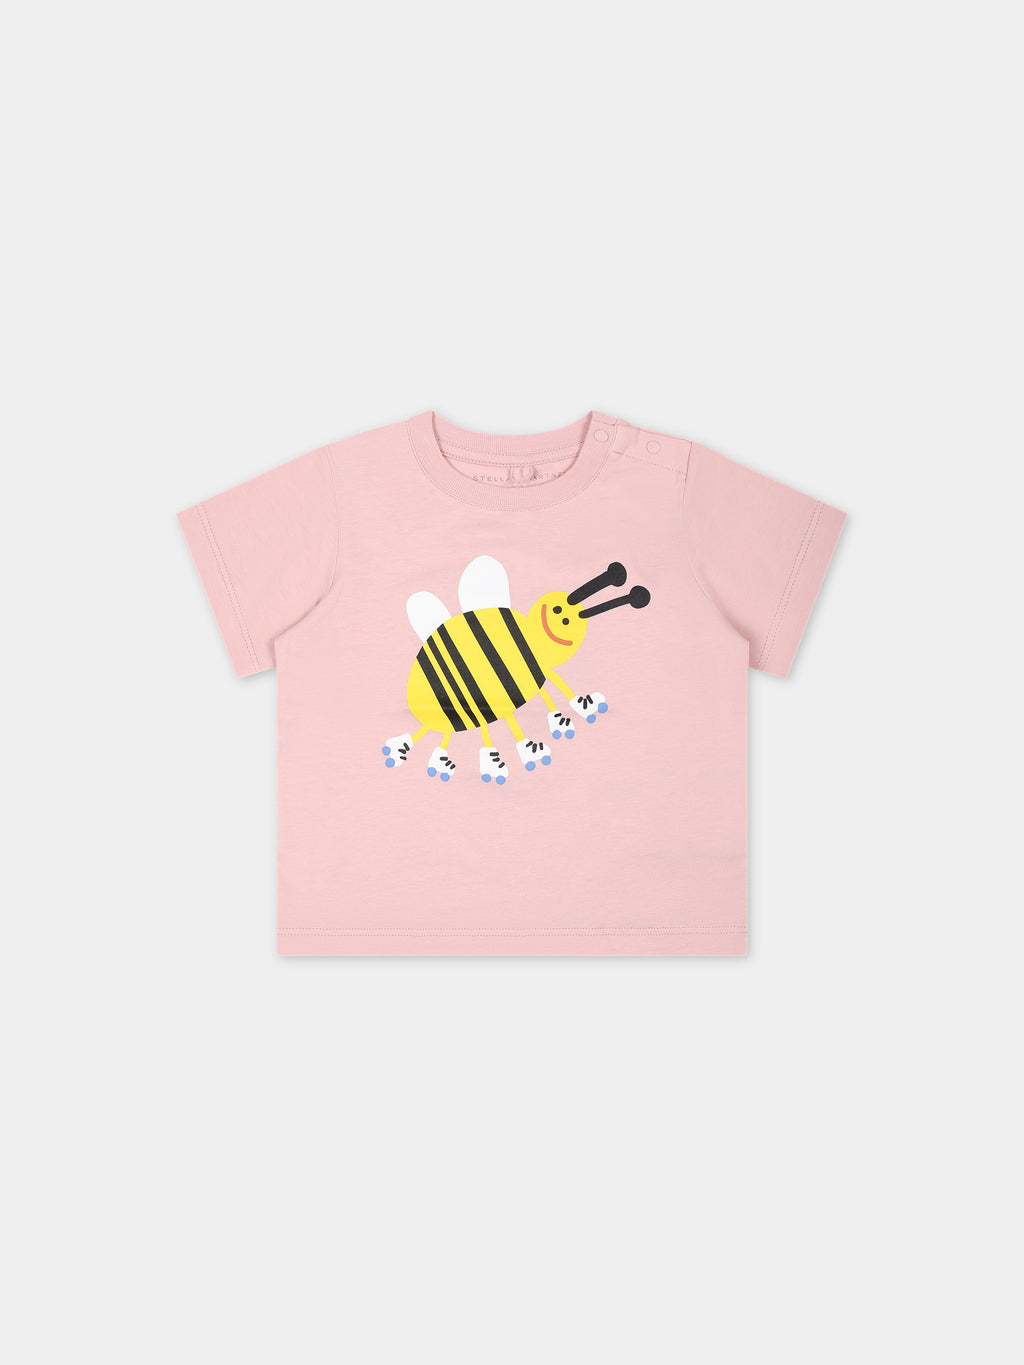 Pink t-shirt for baby girl with bee